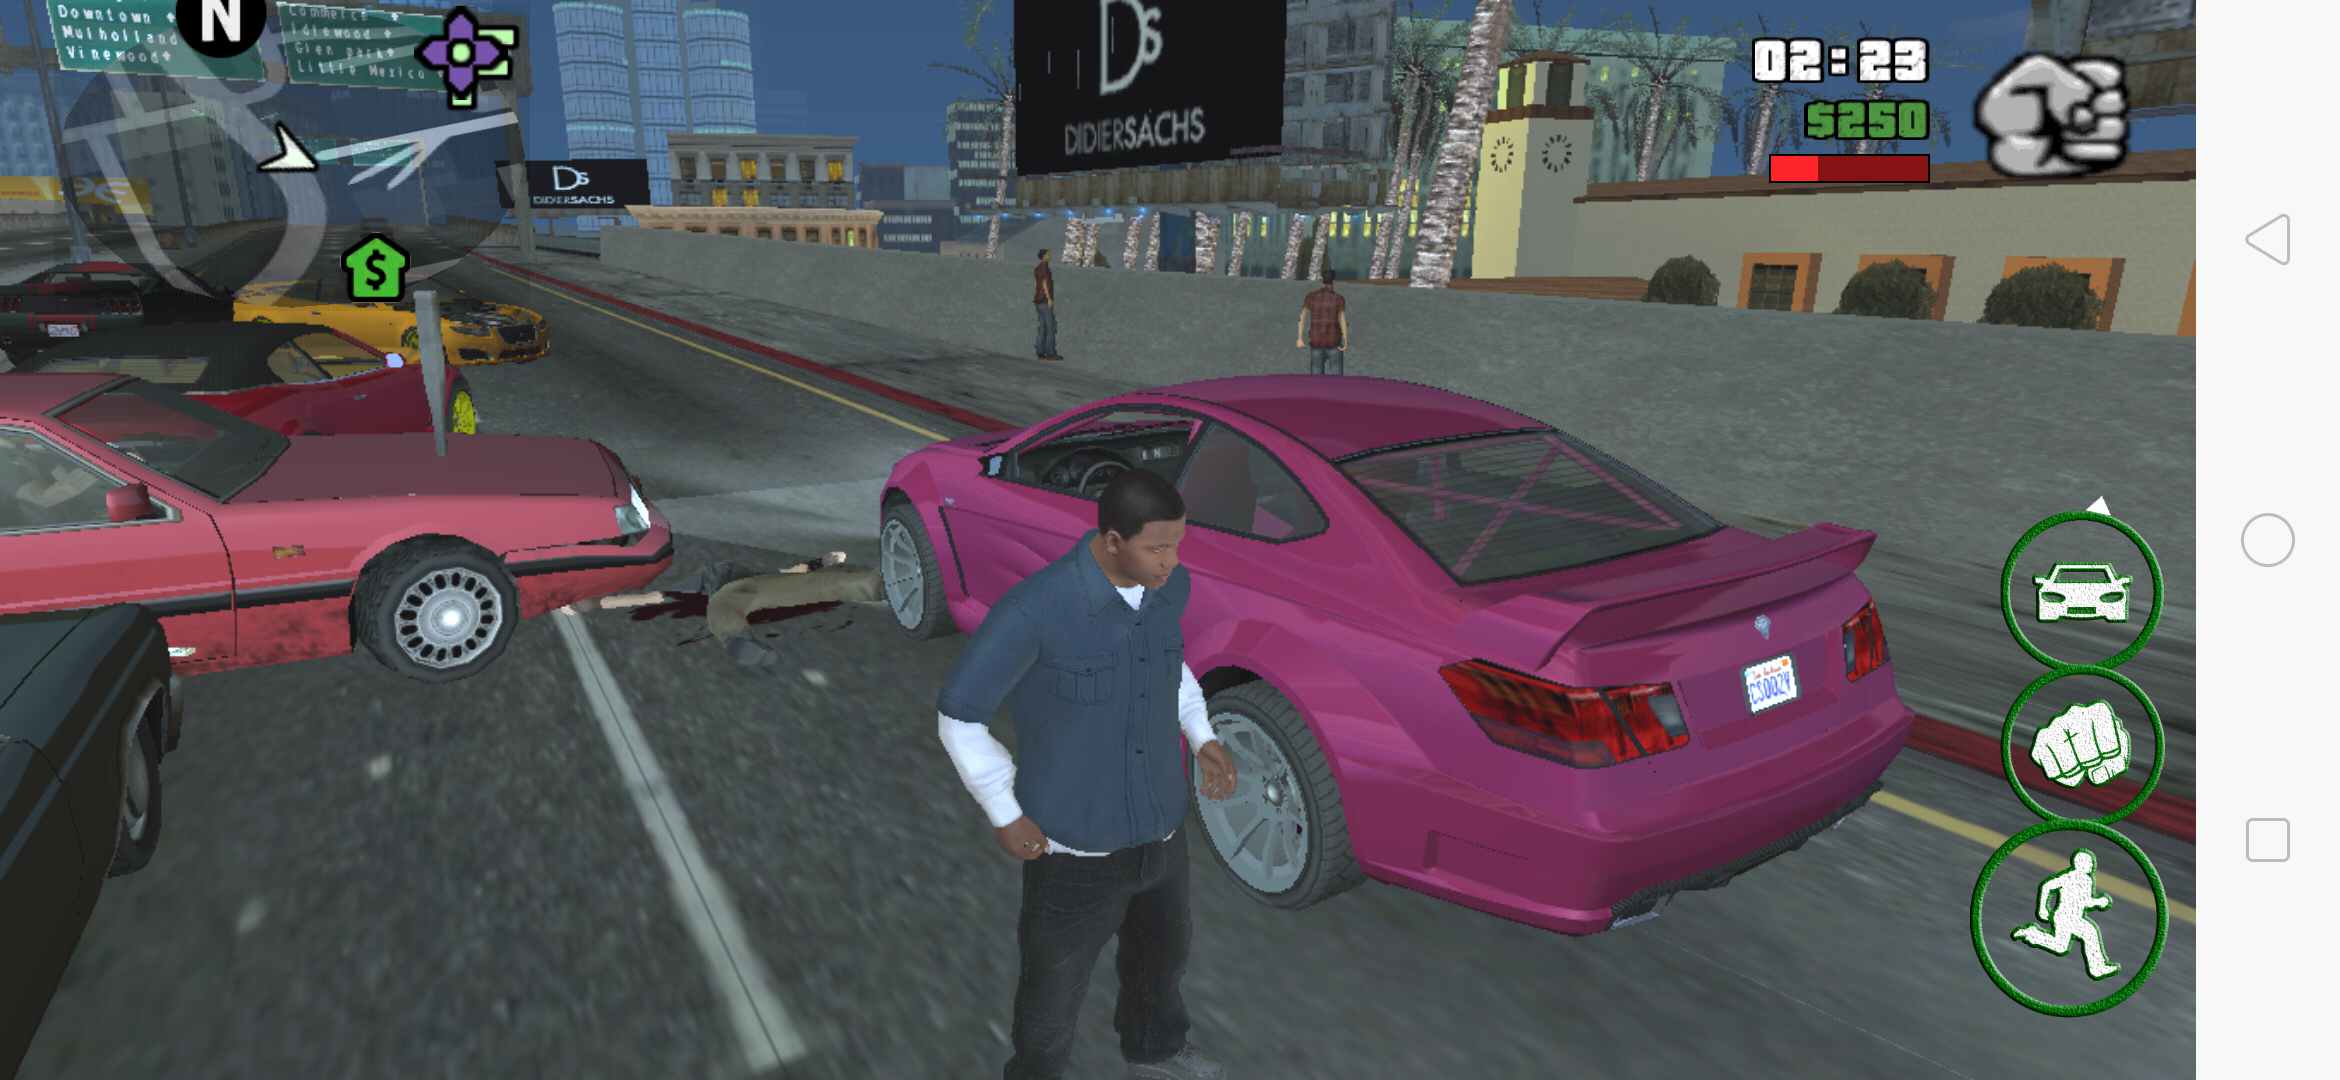 gta v5 for android obb files download